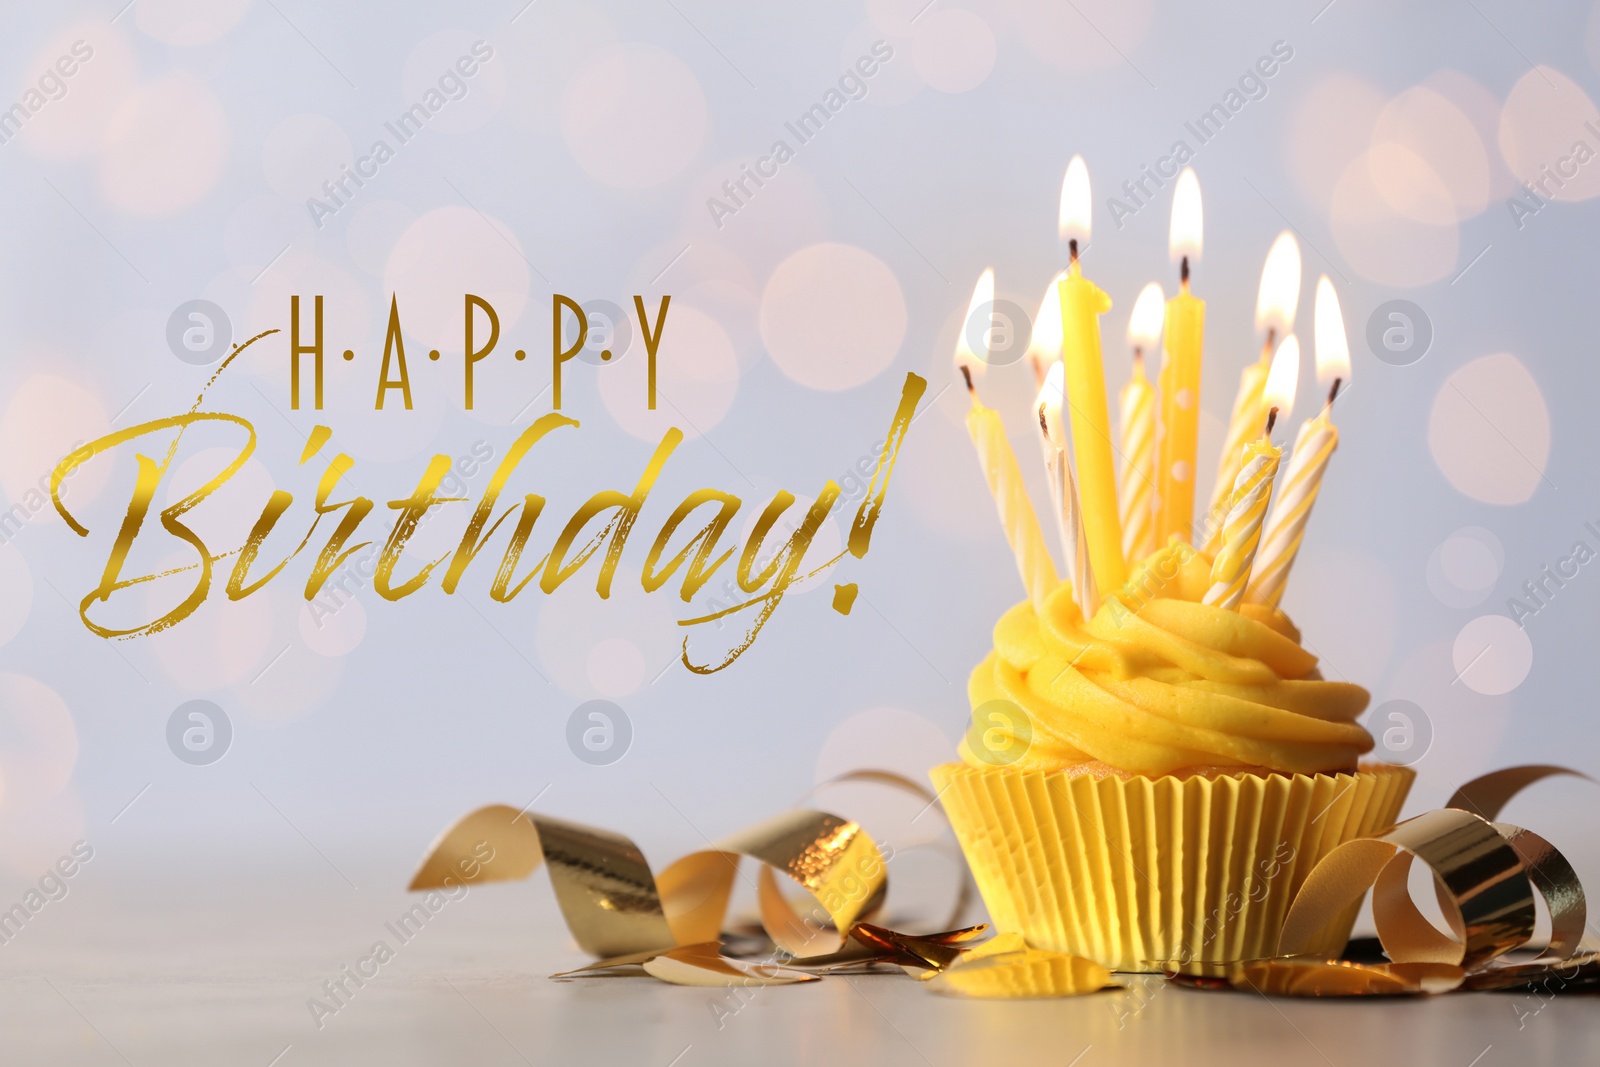 Image of Happy Birthday! Delicious cupcake with burning candles on table